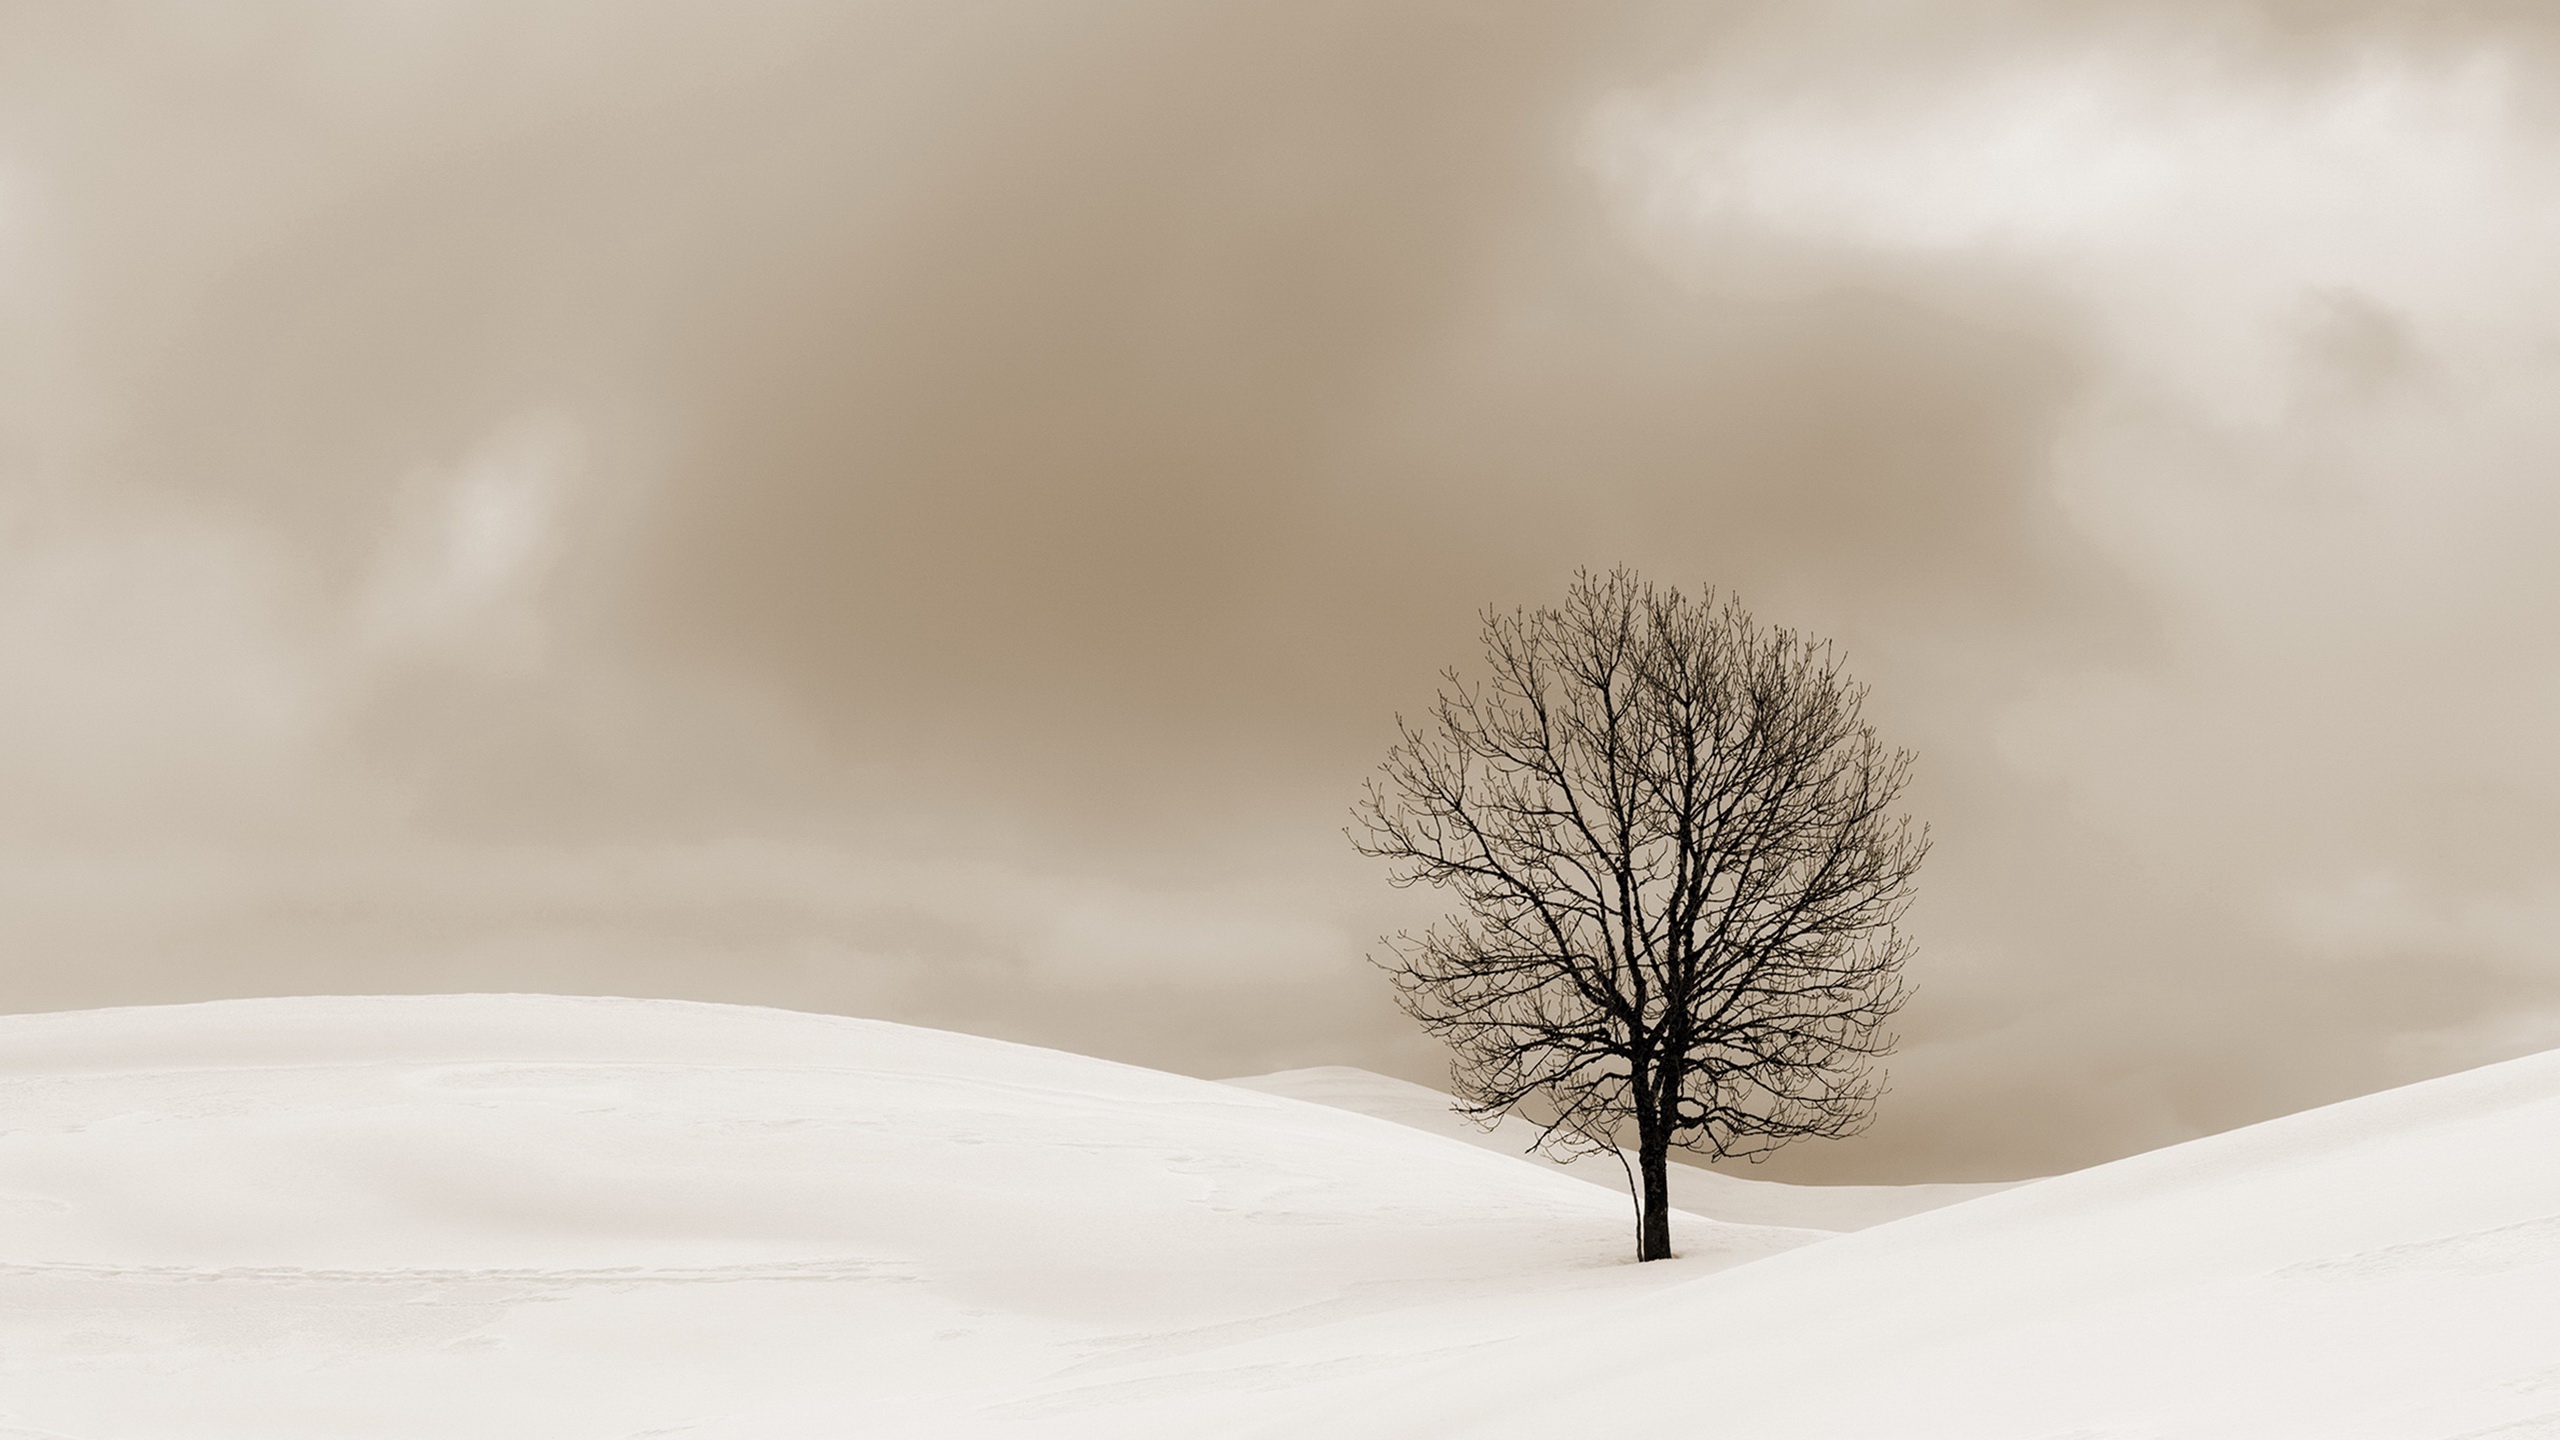 General 2560x1440 nature landscape snow cold trees outdoors winter